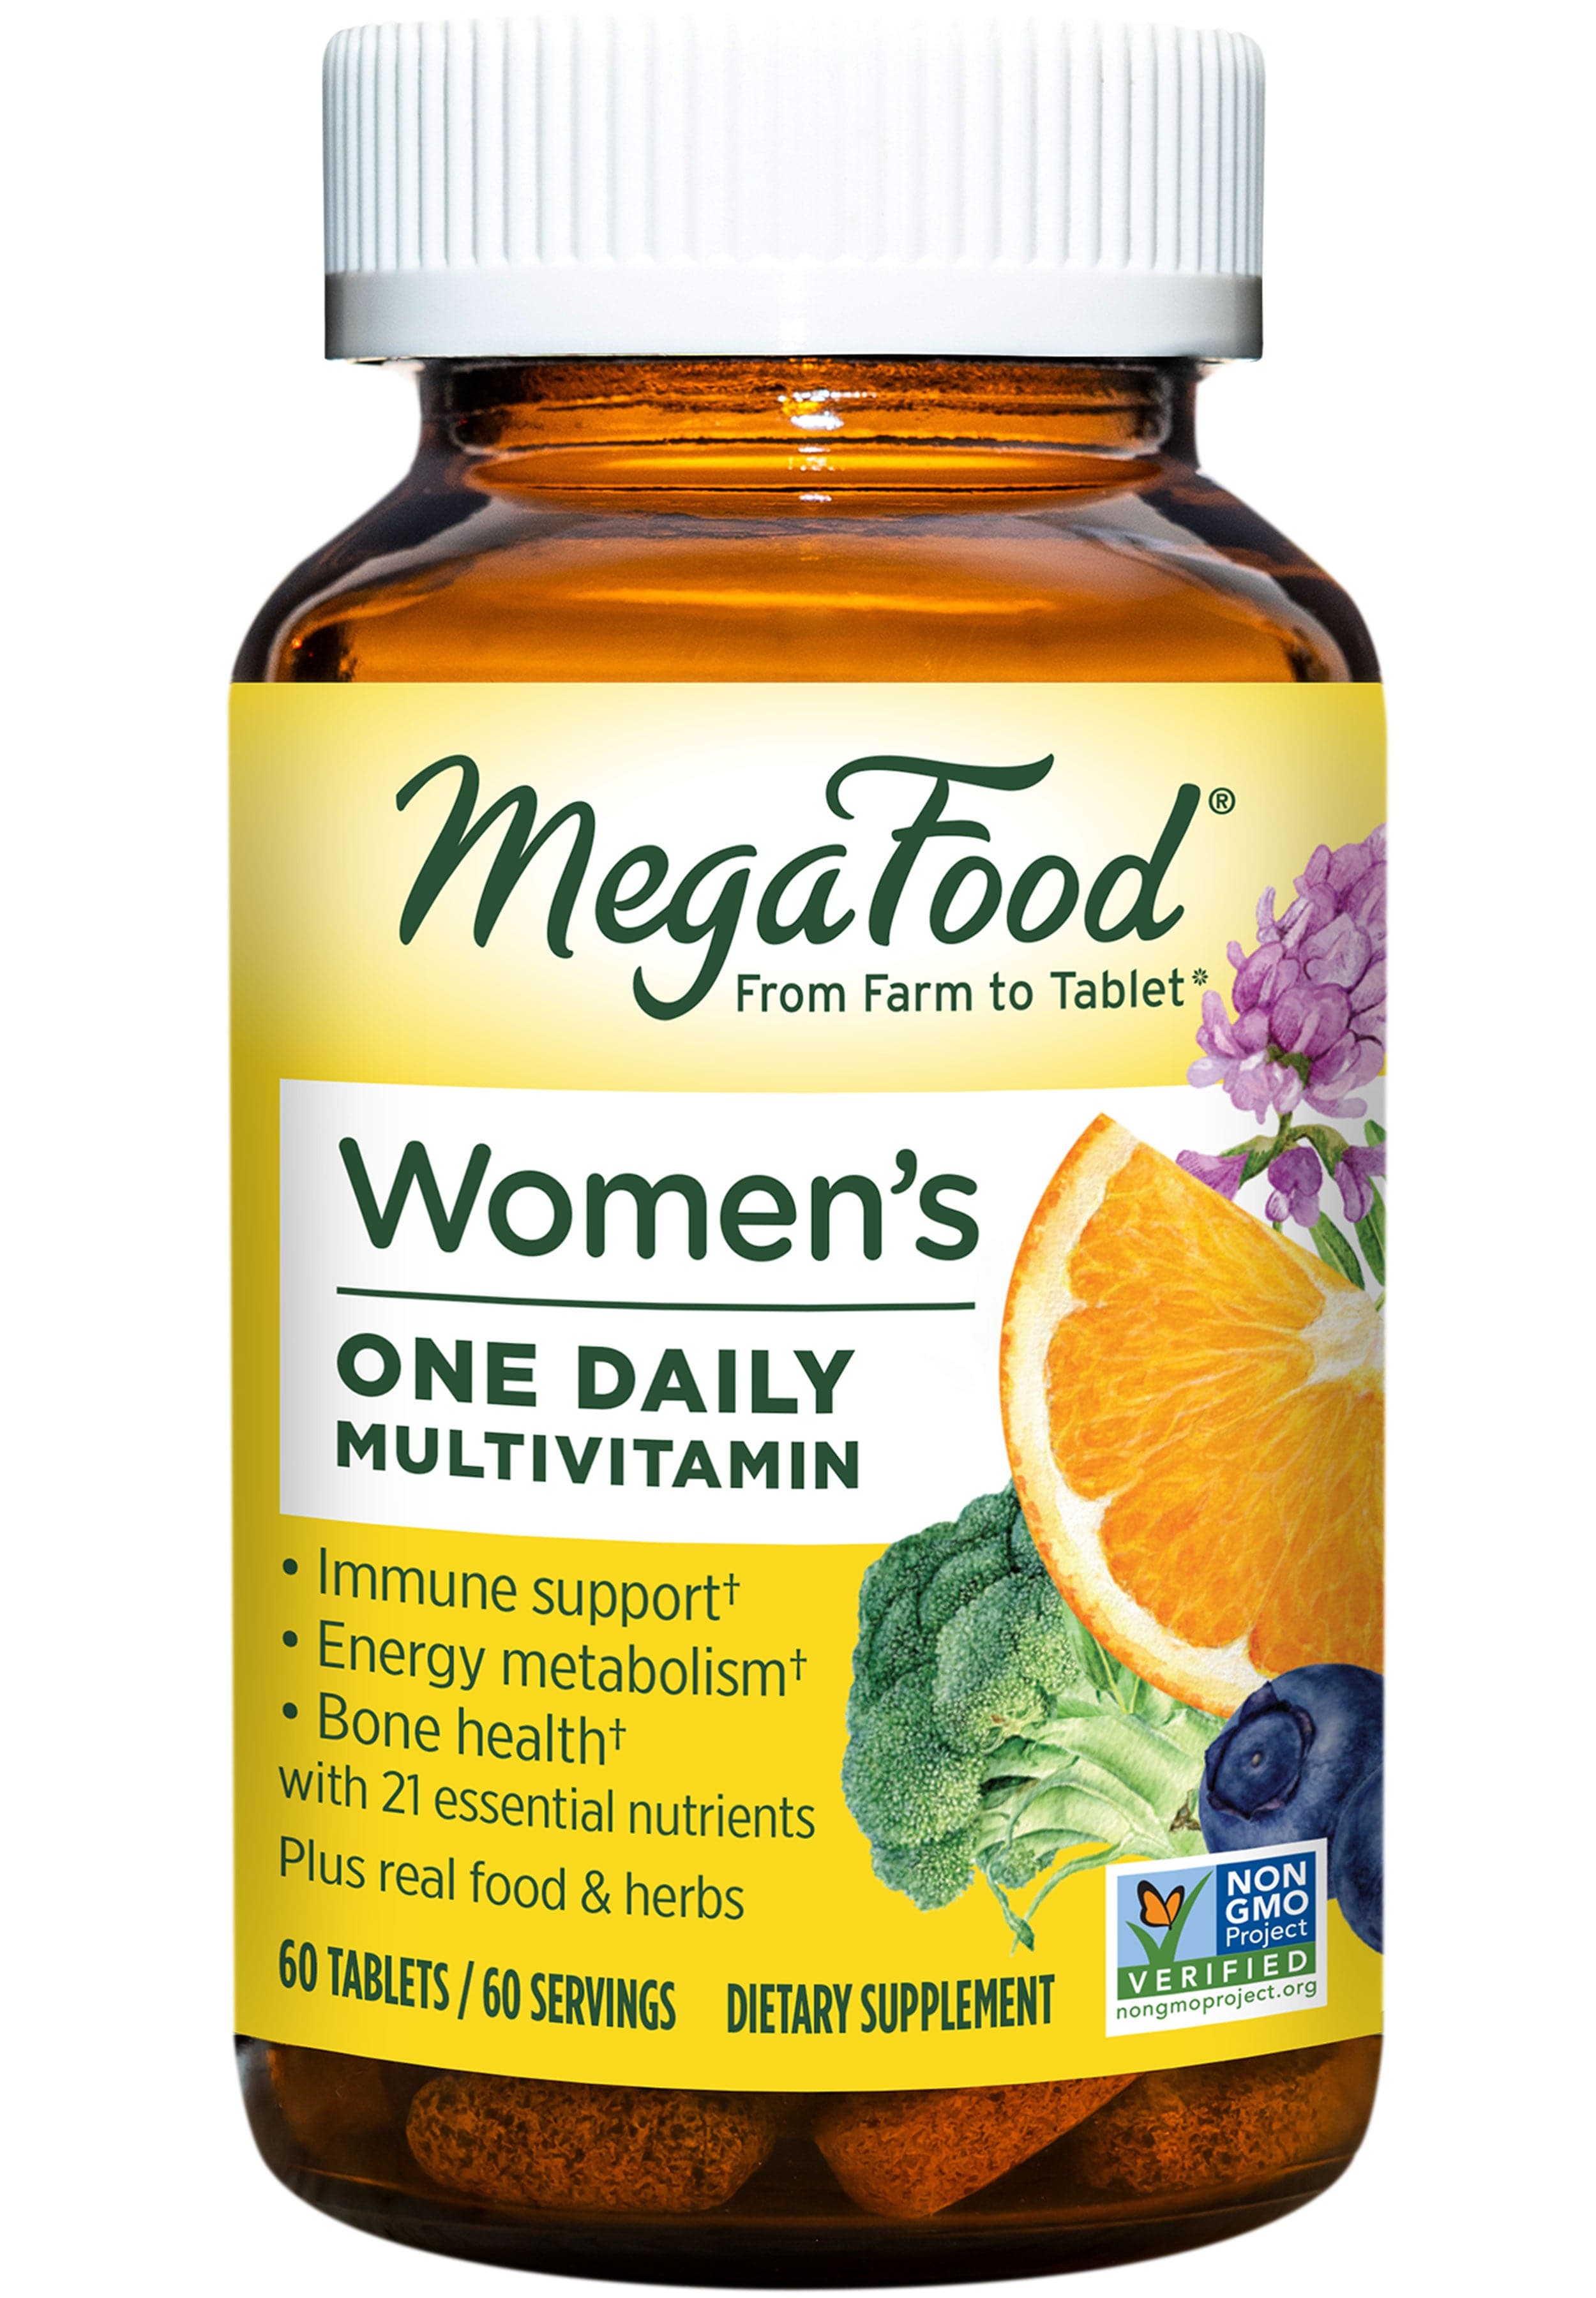 MegaFood Women's One Daily Multivitamin.